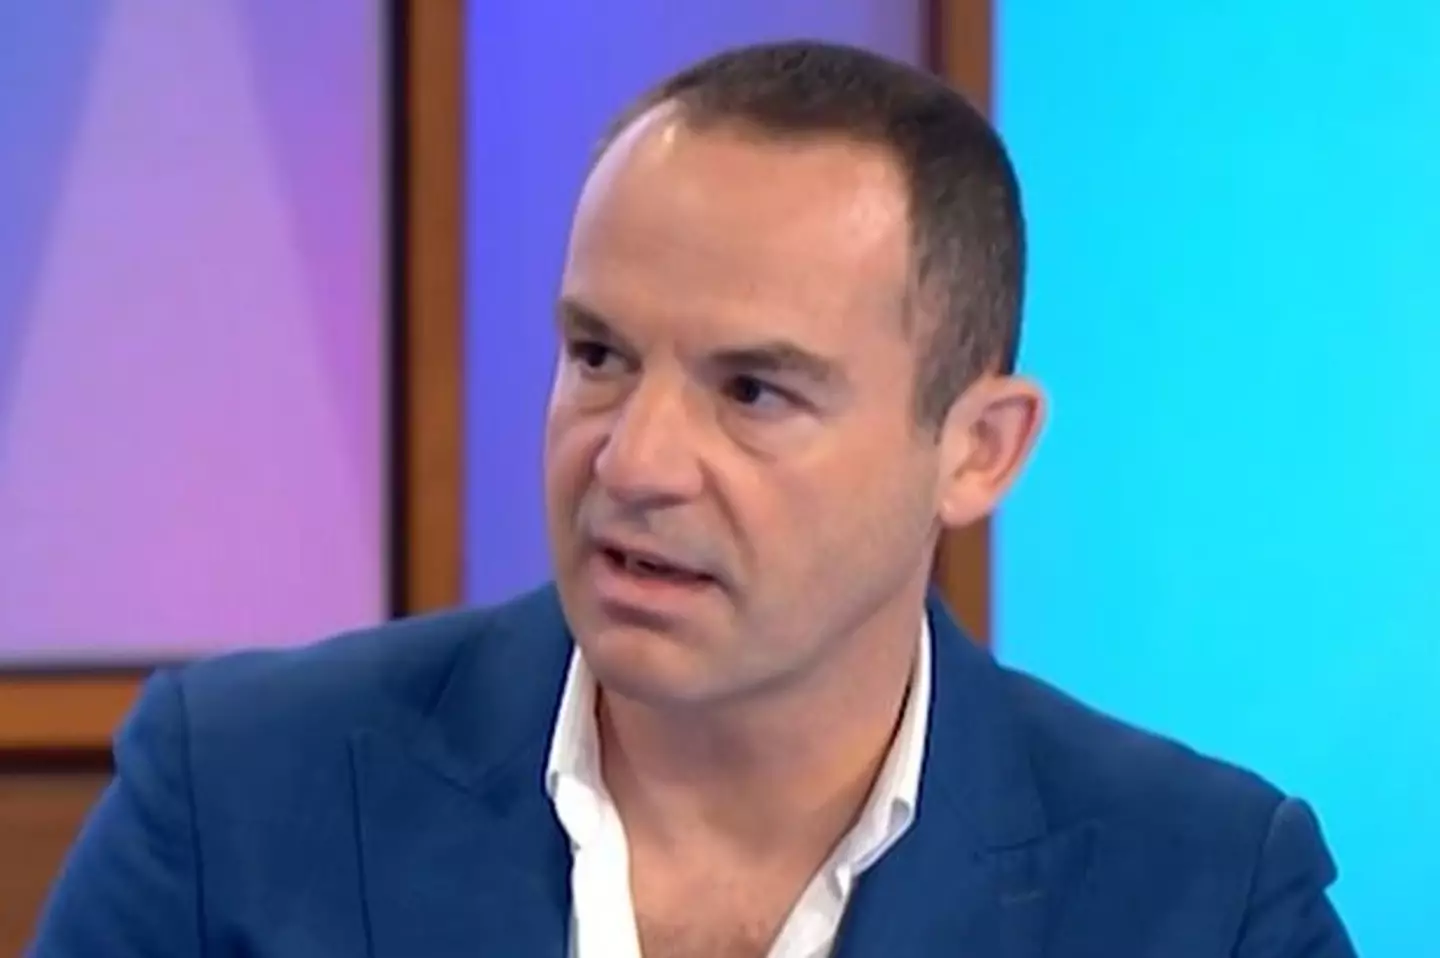 Martin Lewis has issued a warning as people threaten to boycott energy bills.